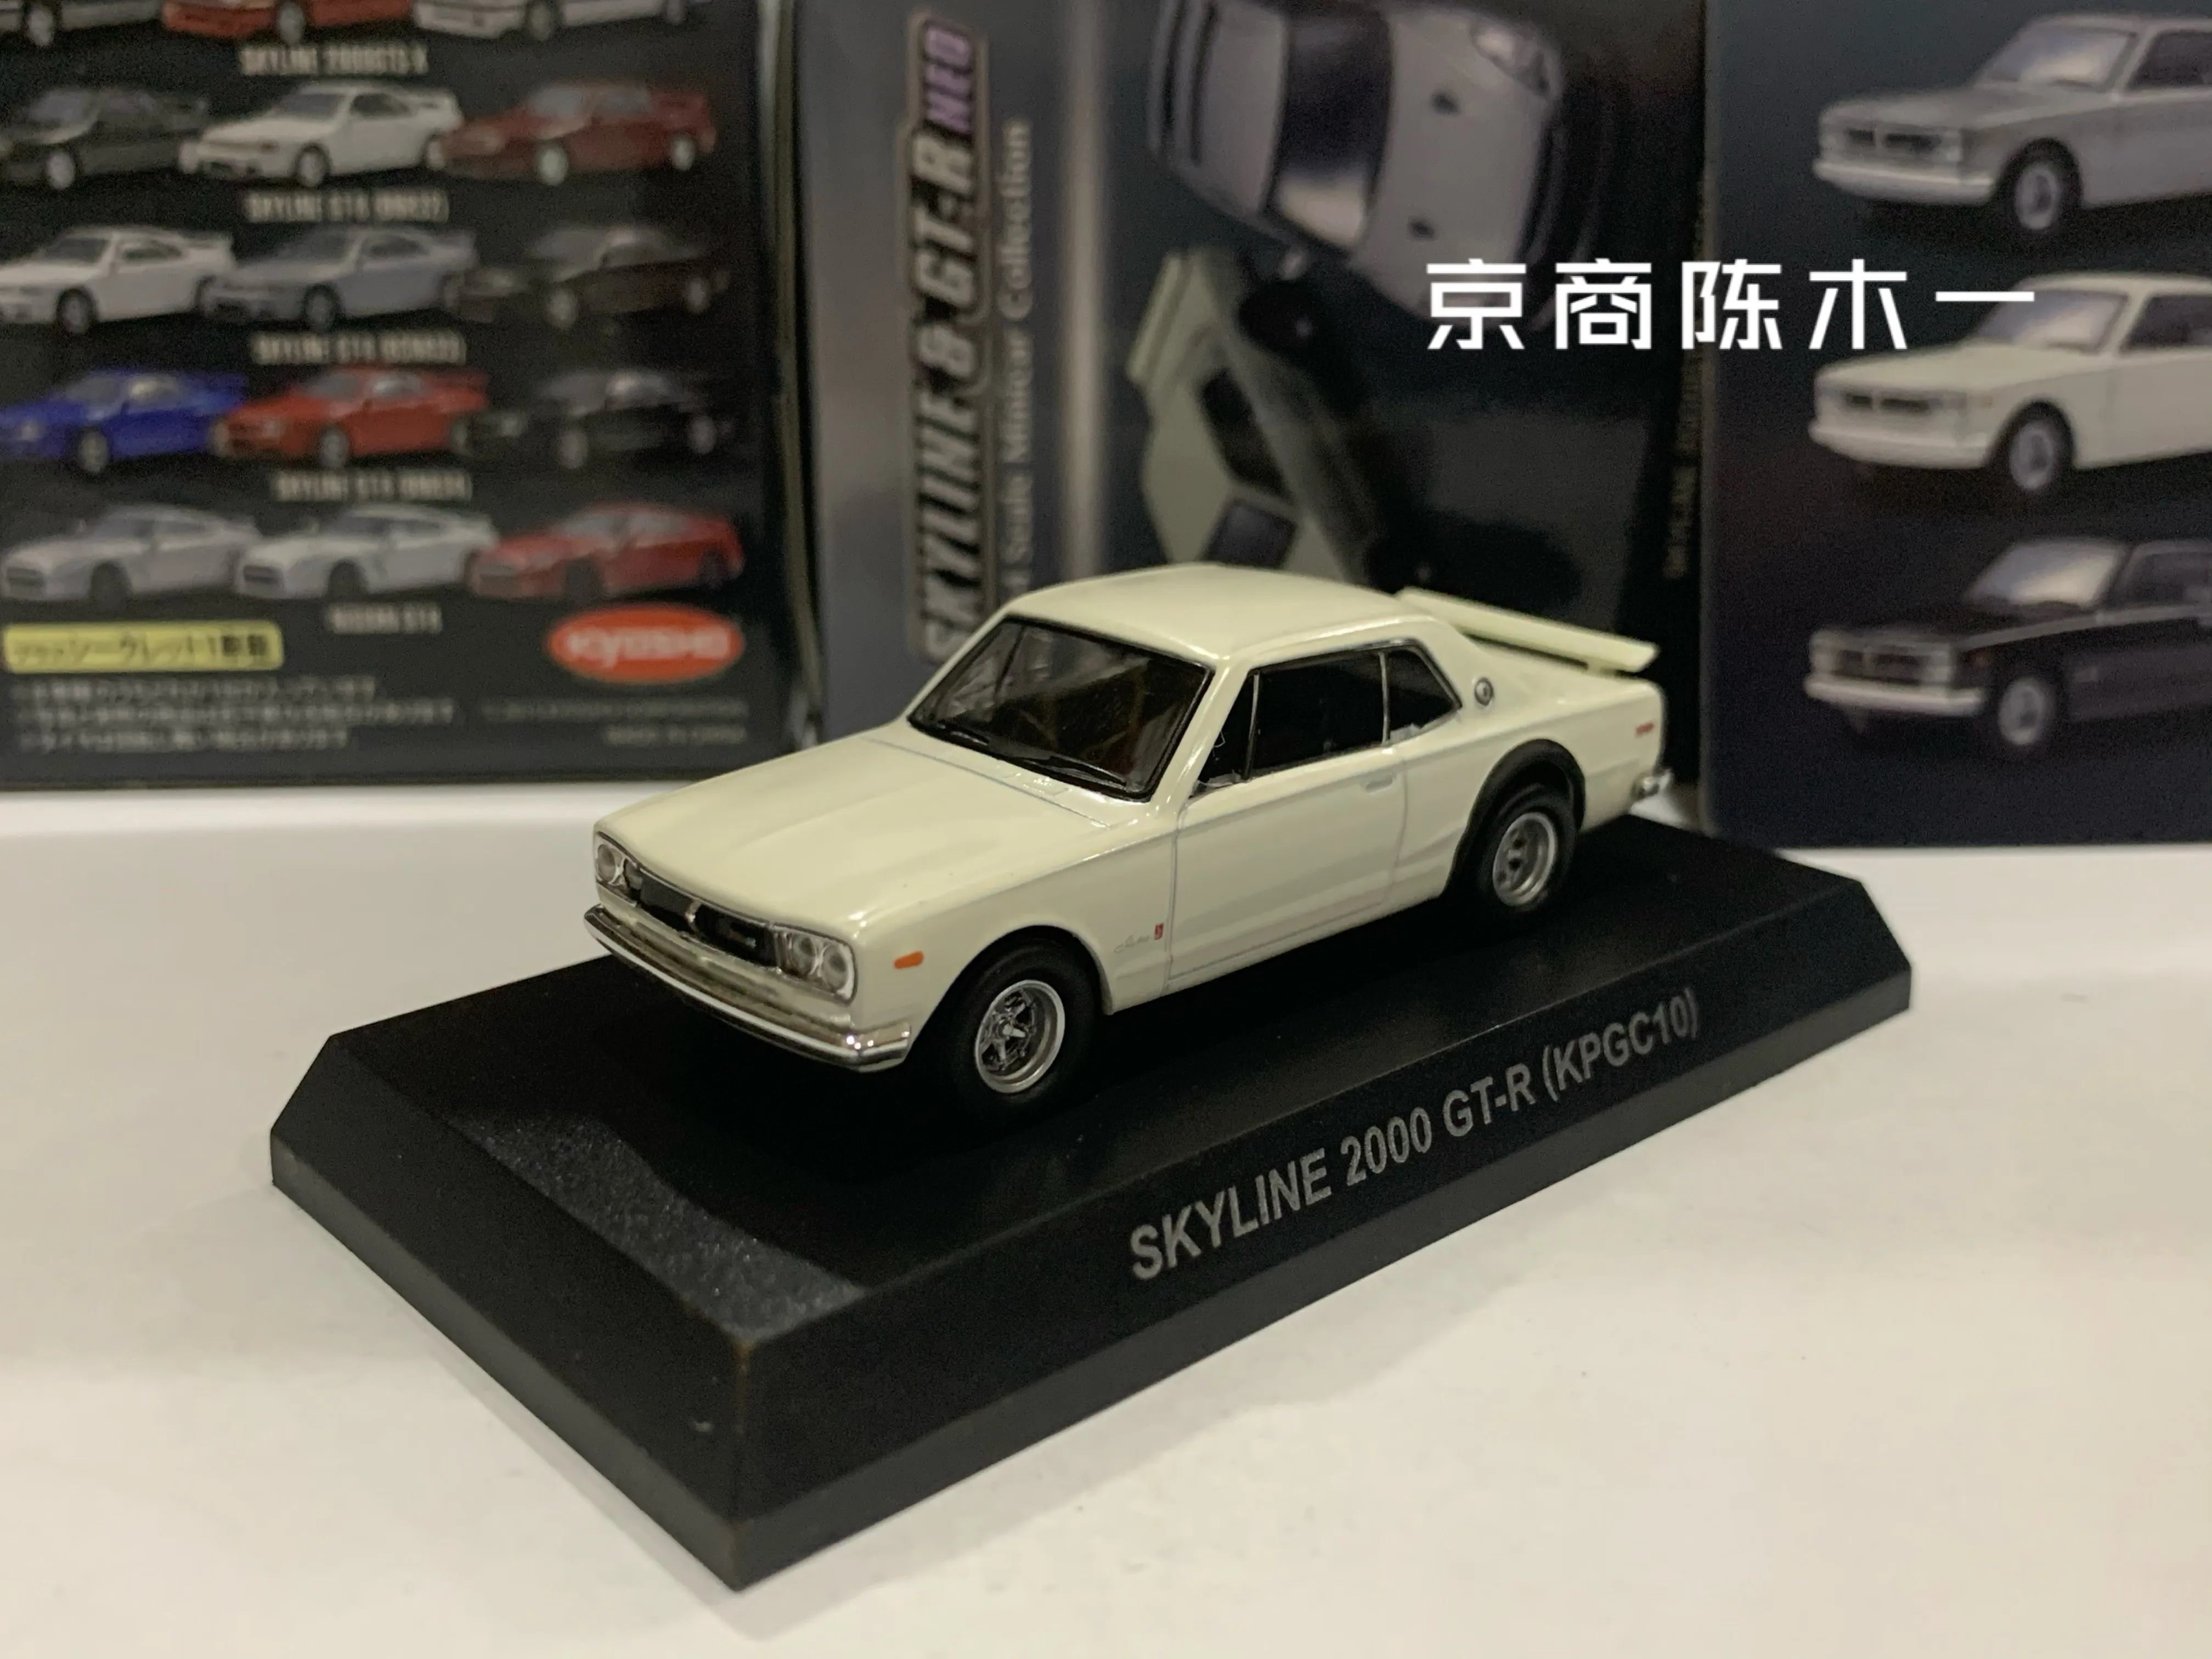 

1/64 KYOSHO Skyline 2000 GT-R KPGC10 Collection of die-cast alloy car decoration model toys